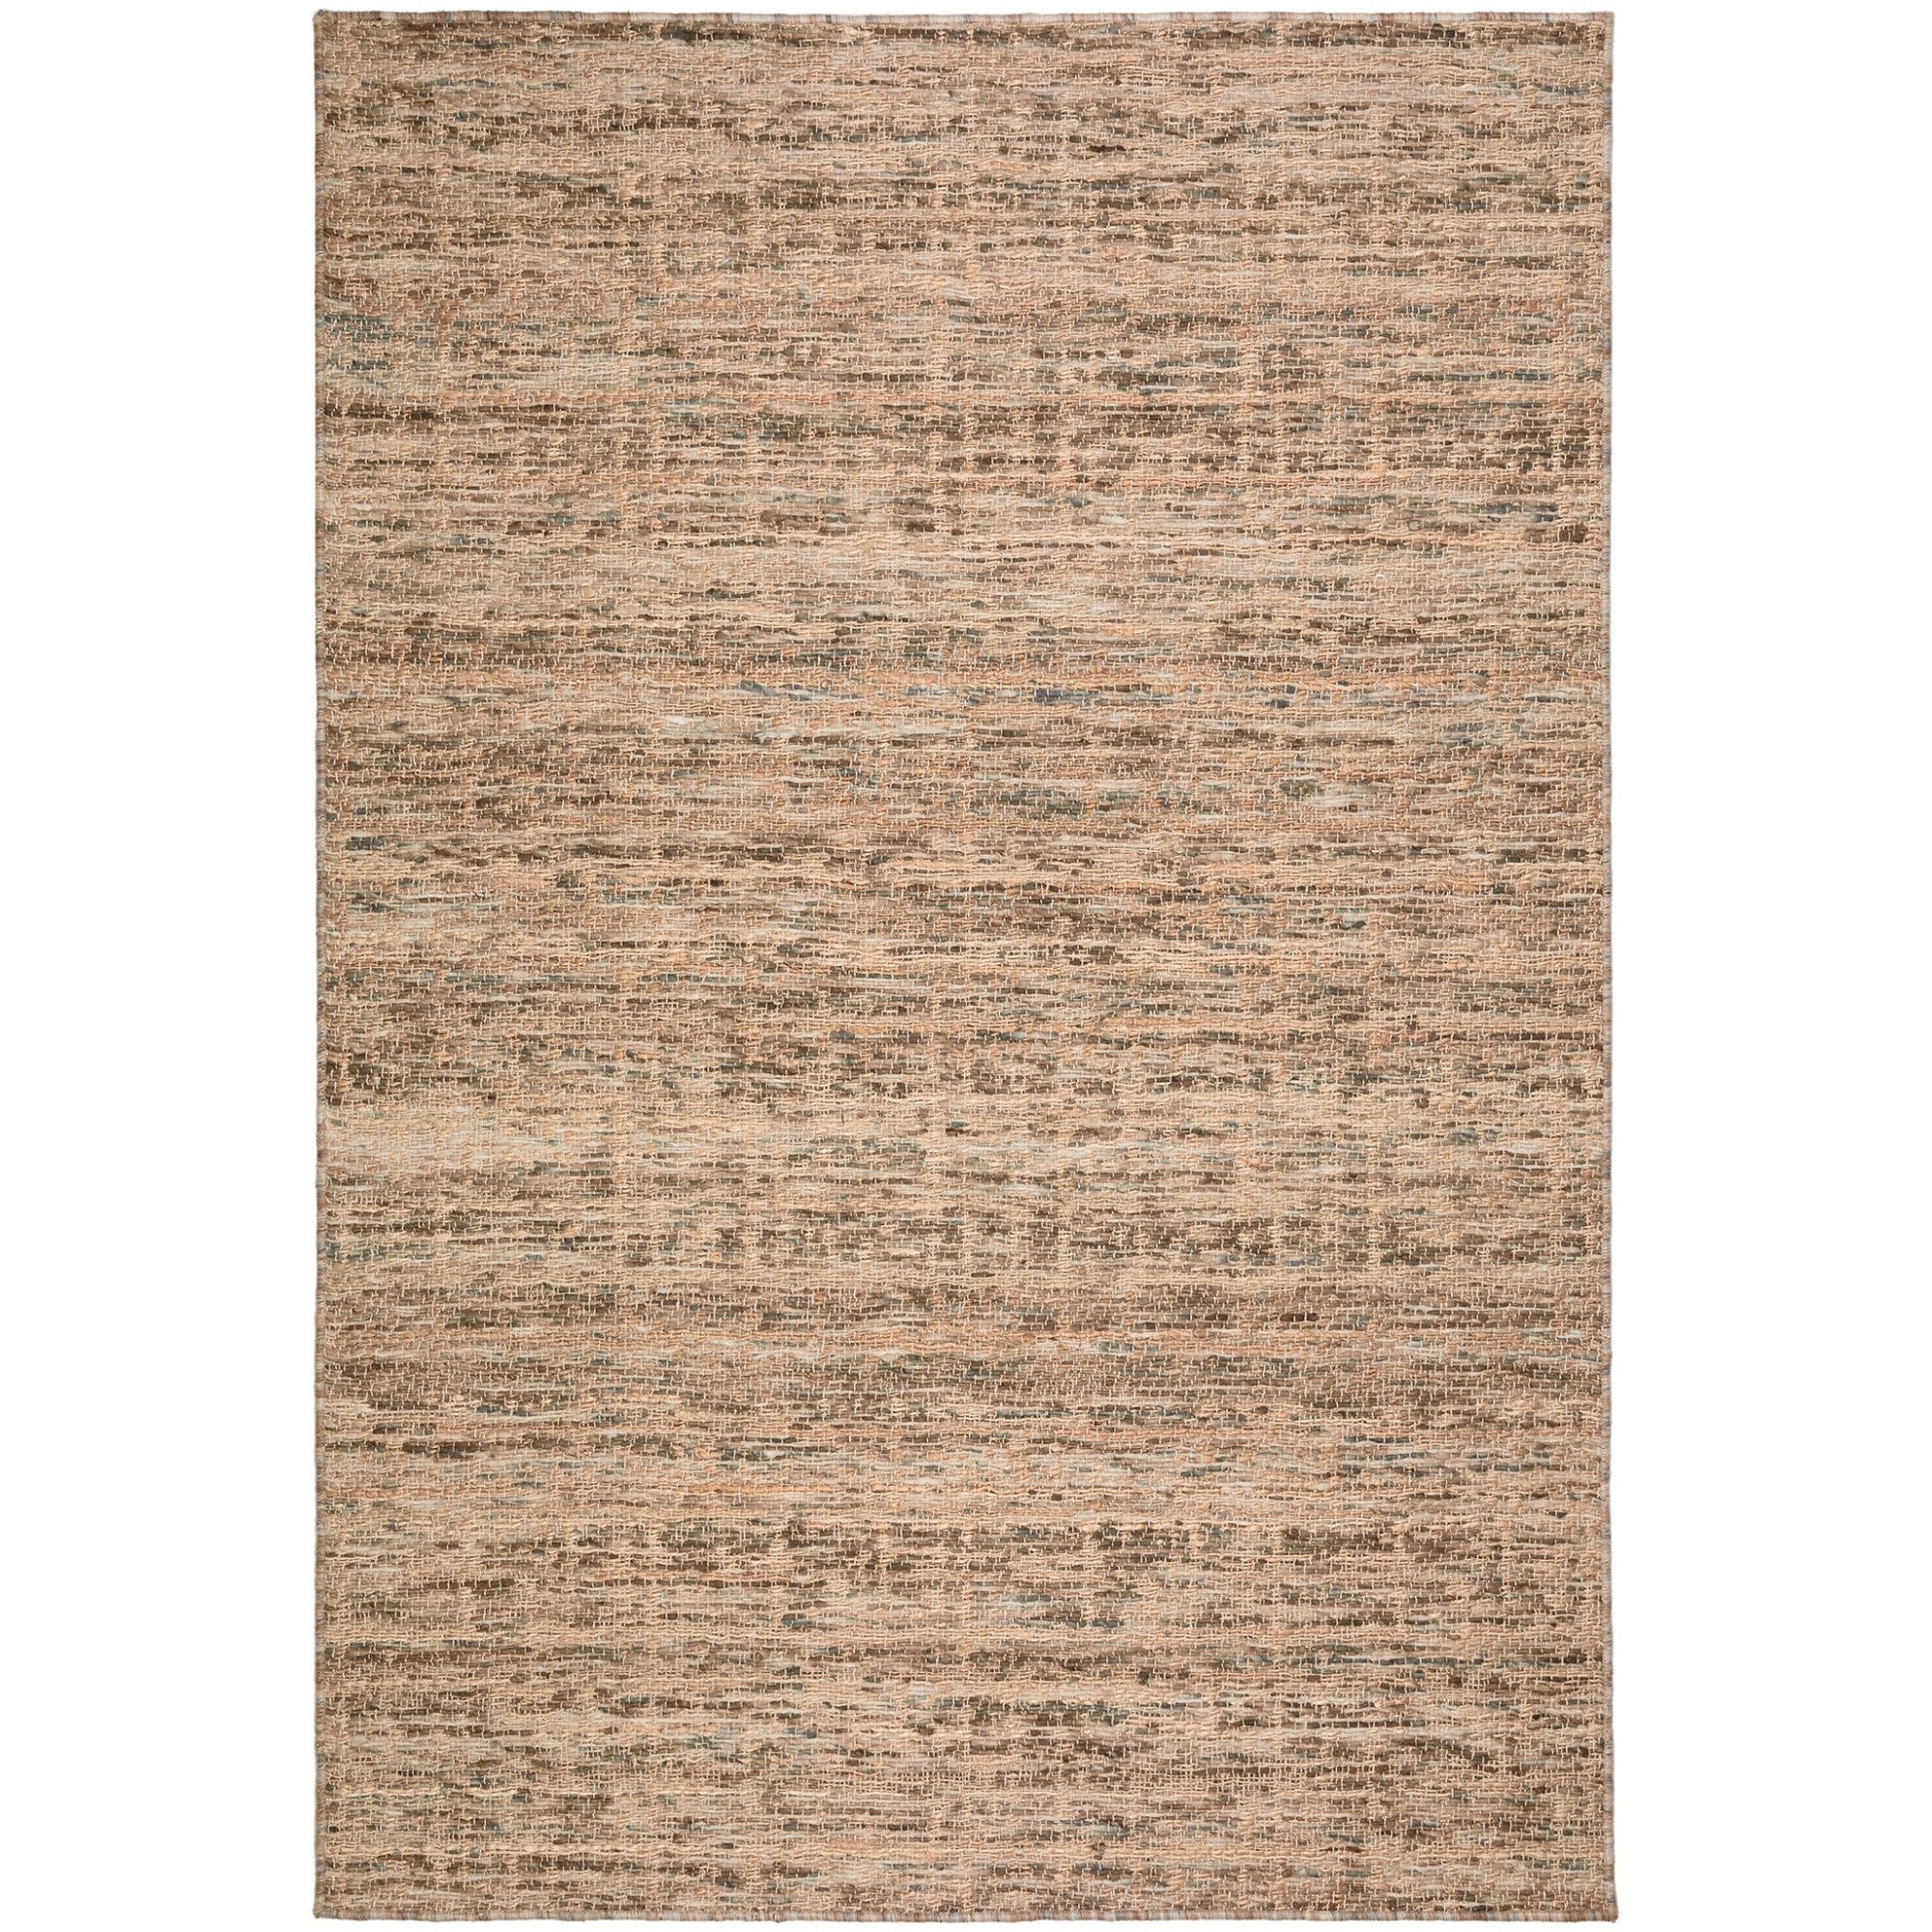 [Style] Natural Rugs